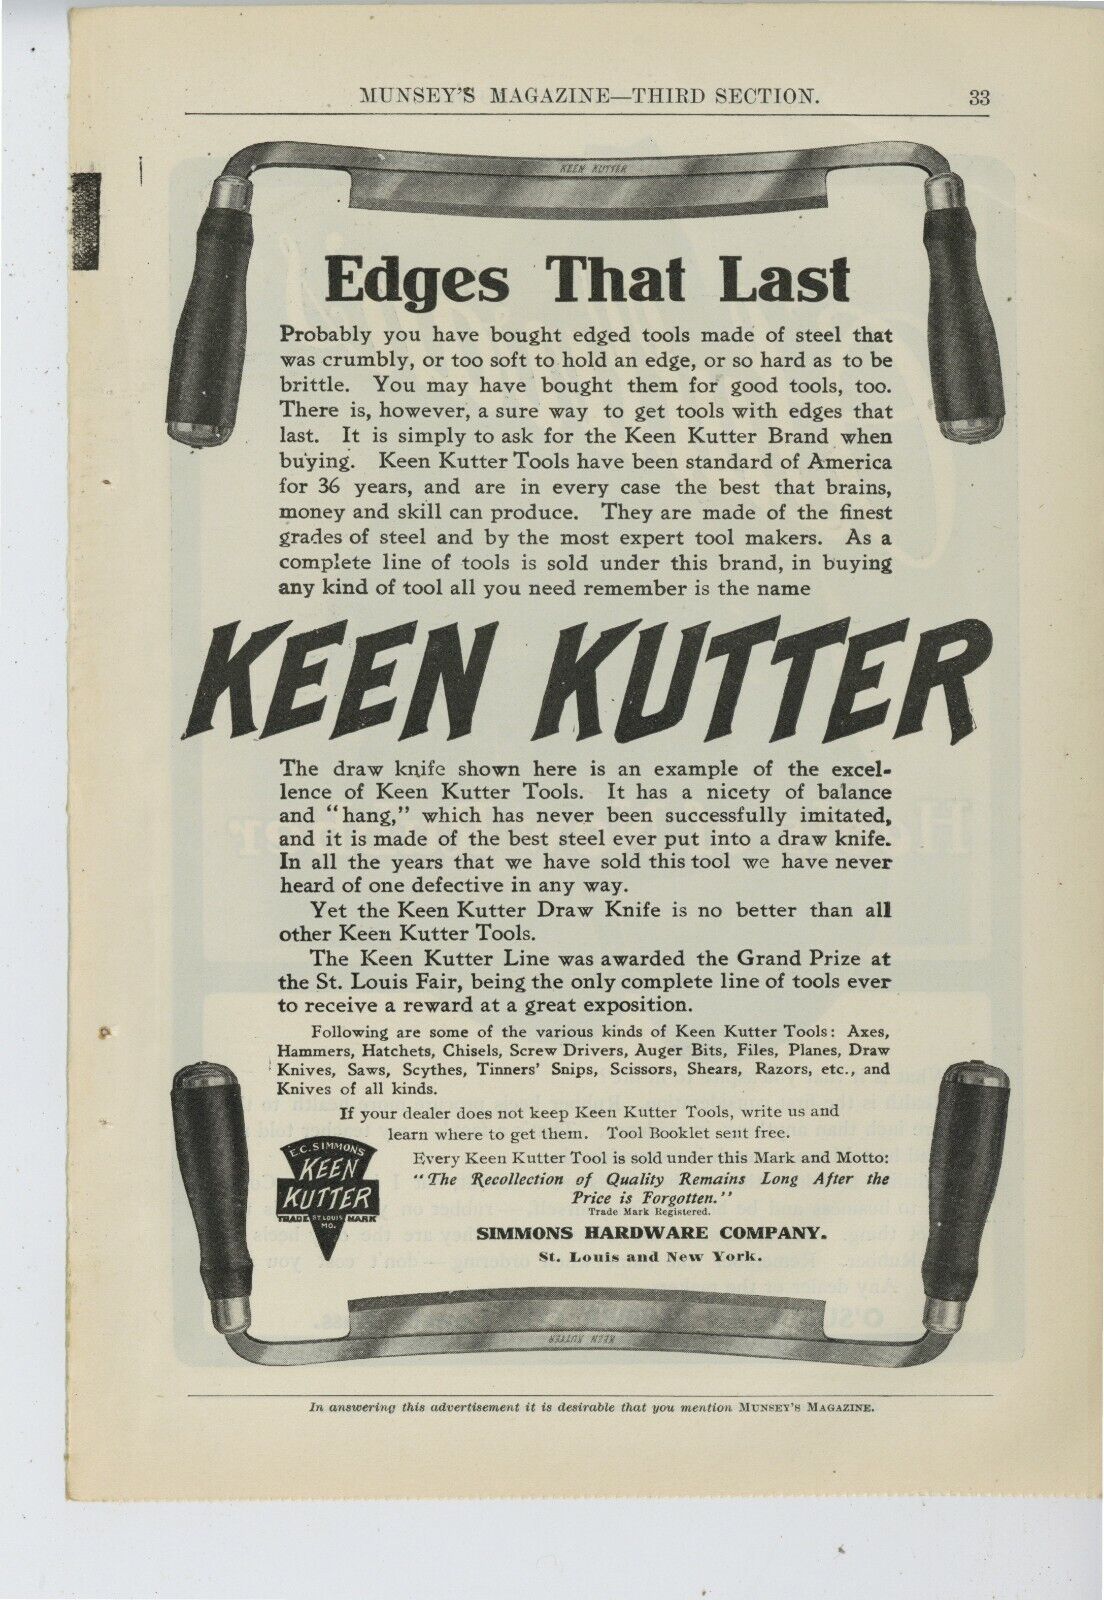 1906 Simmons Hardware Co. Ad: Keen Kutter Draw Knife Pictured - St. Louis, MO